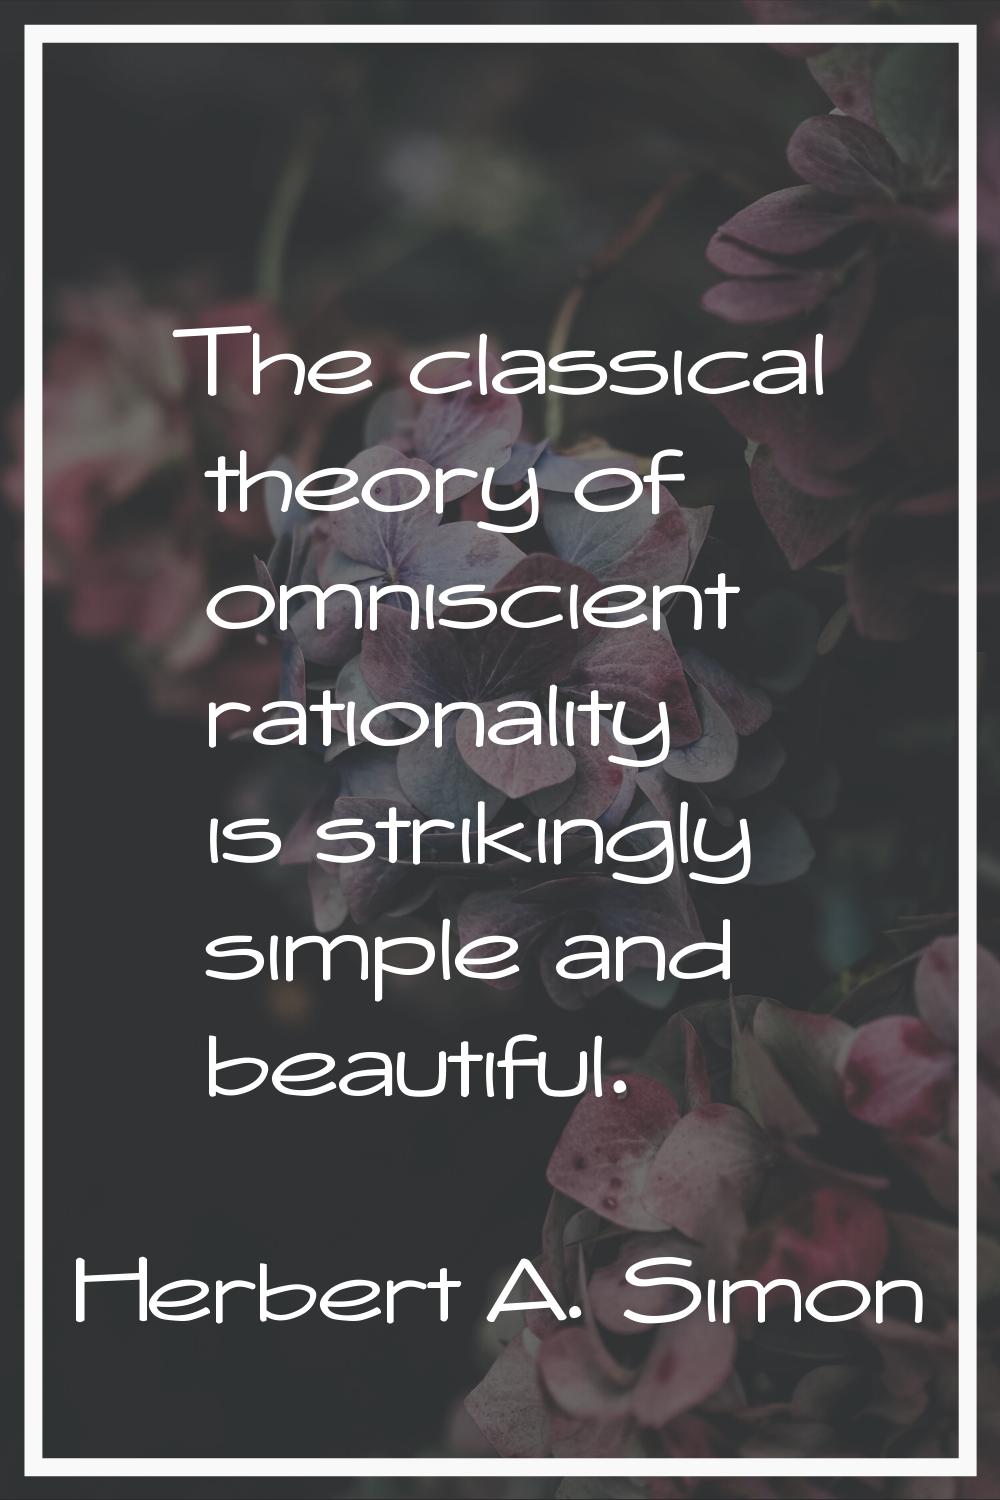 The classical theory of omniscient rationality is strikingly simple and beautiful.